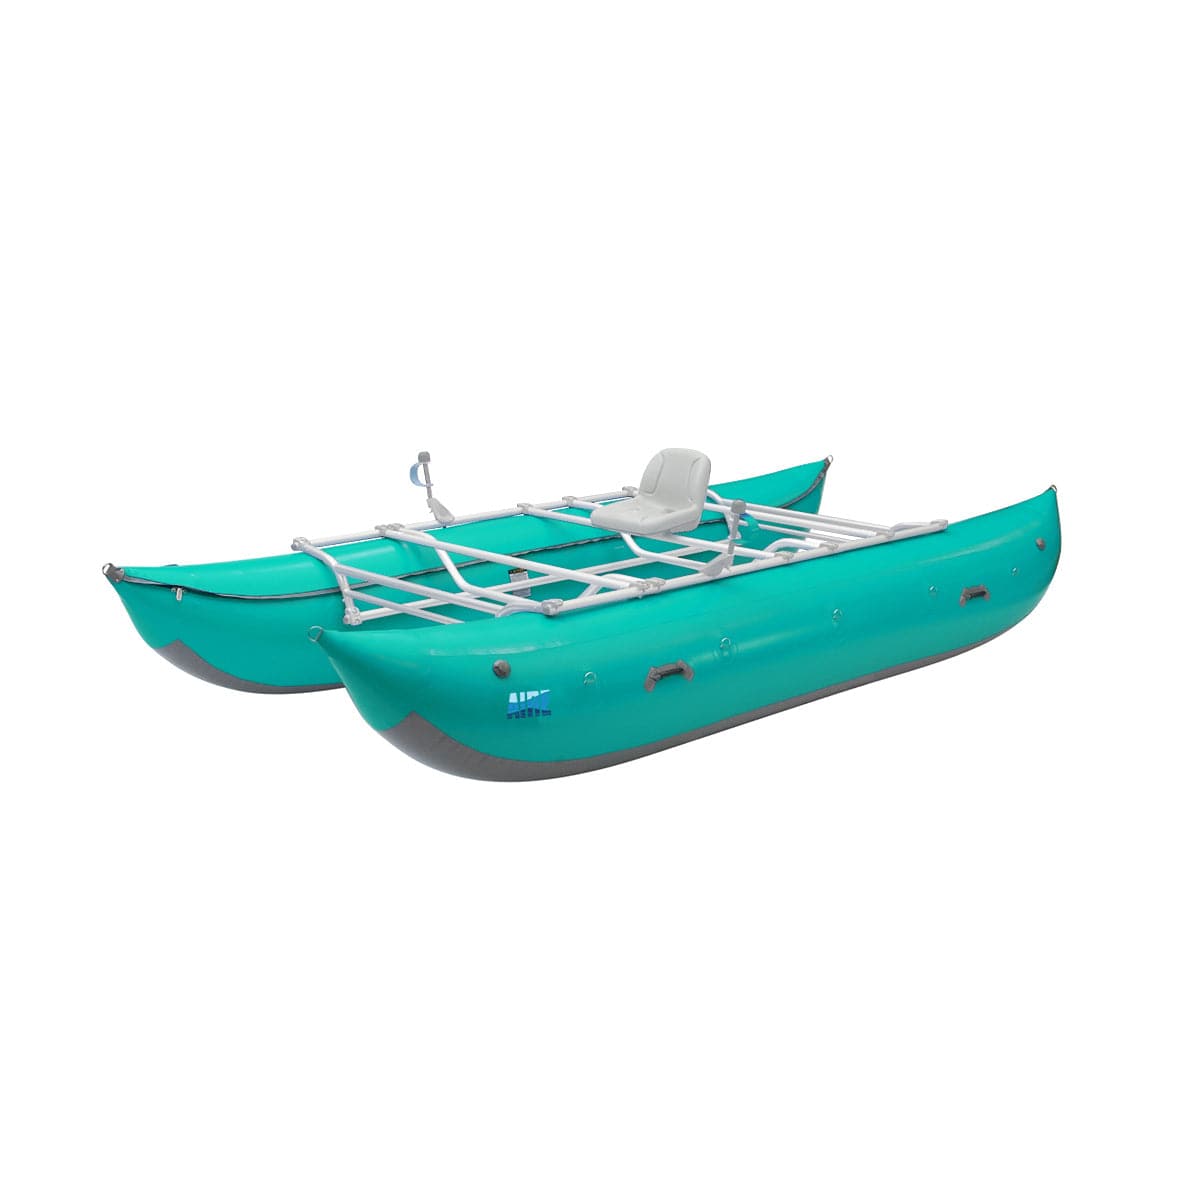 Featuring the Lion Cataraft cataraft manufactured by AIRE shown here from a ninth angle.